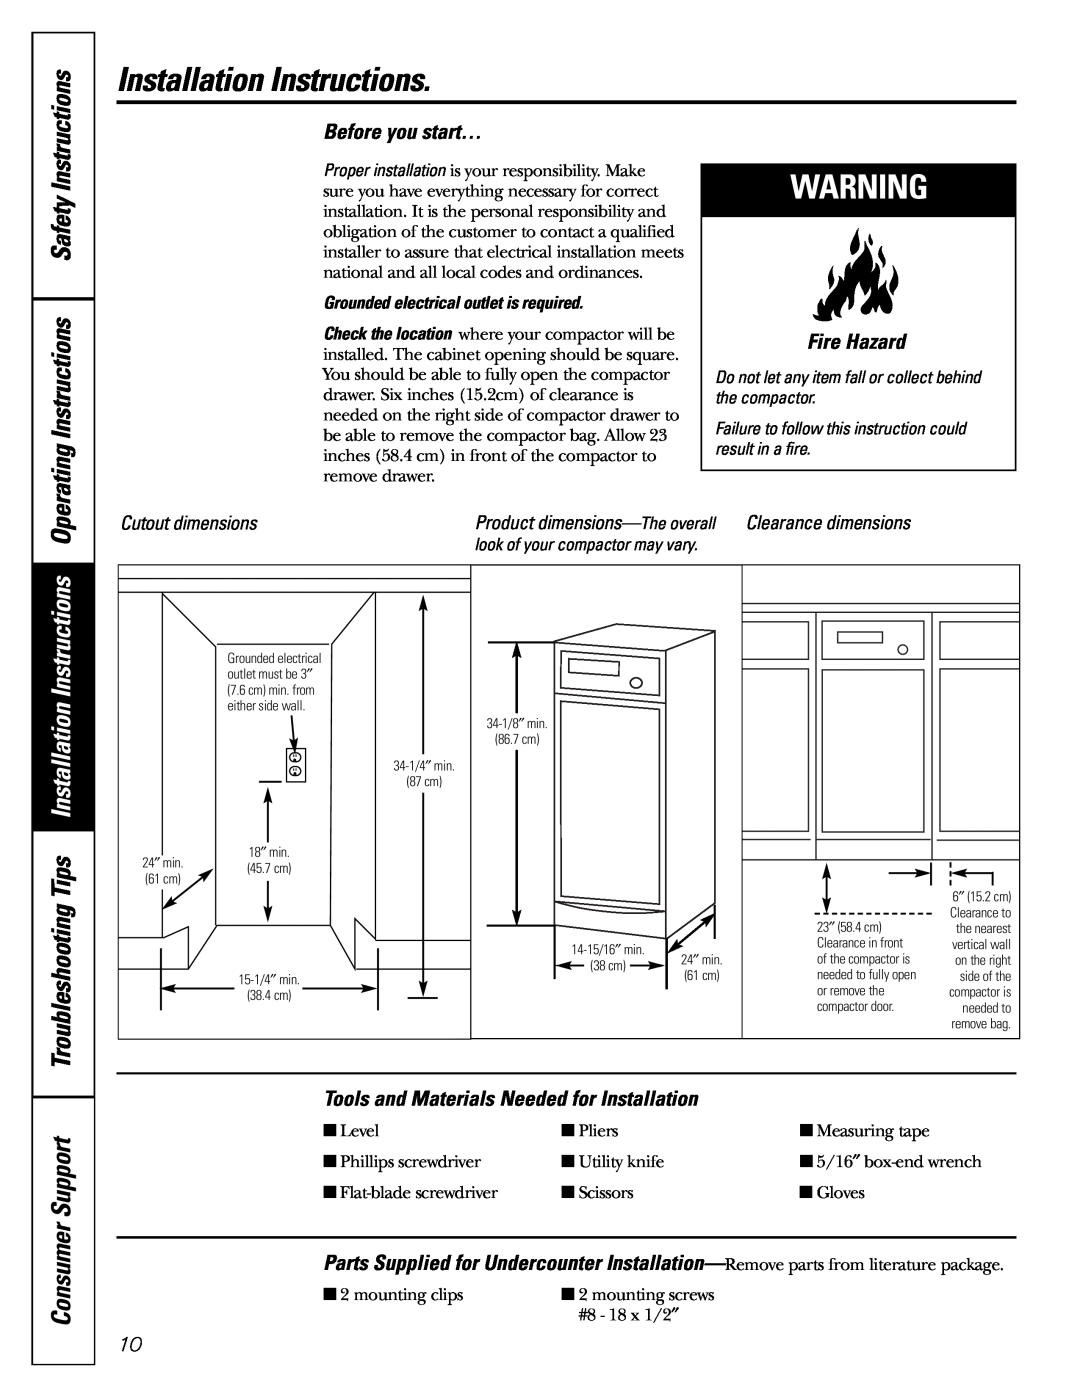 GE GCG1520 Installation Instructions, Consumer Support, Before you start…, Fire Hazard, Cutout dimensions 